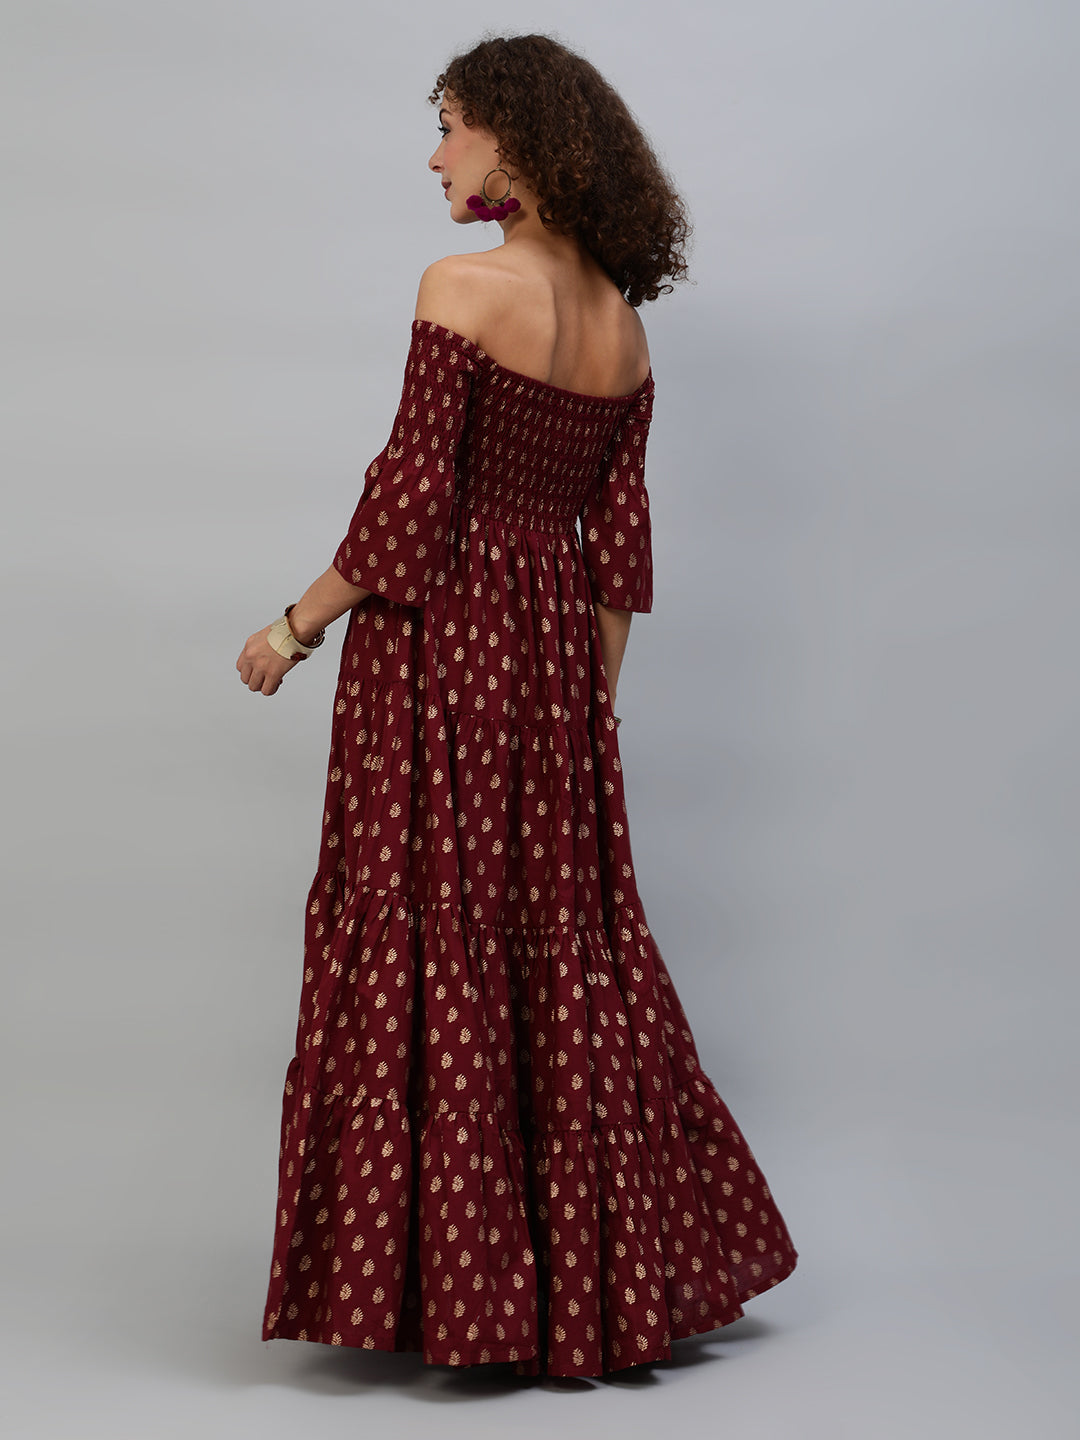 Maroon Gold Printed Off Shoulder Tiered Dress Mother Daughter Combo